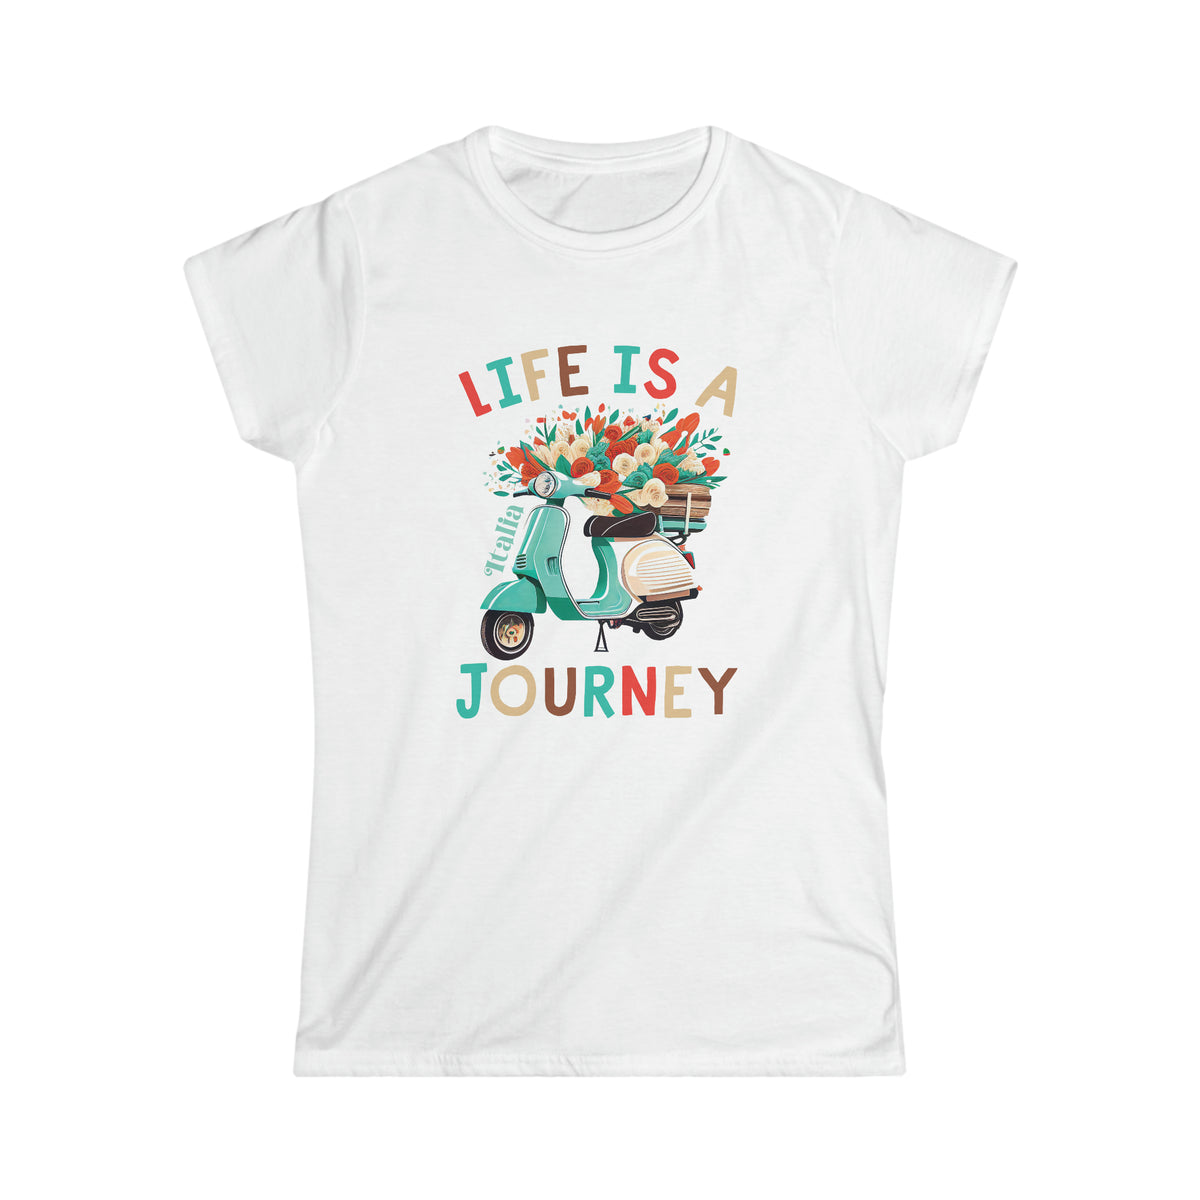 Life Is A Journey Italy Shirt | Italy Travel Gifts | Italy Vacation Shirt | Gift For Her | Women's Slim Fit Soft Style T-shirt